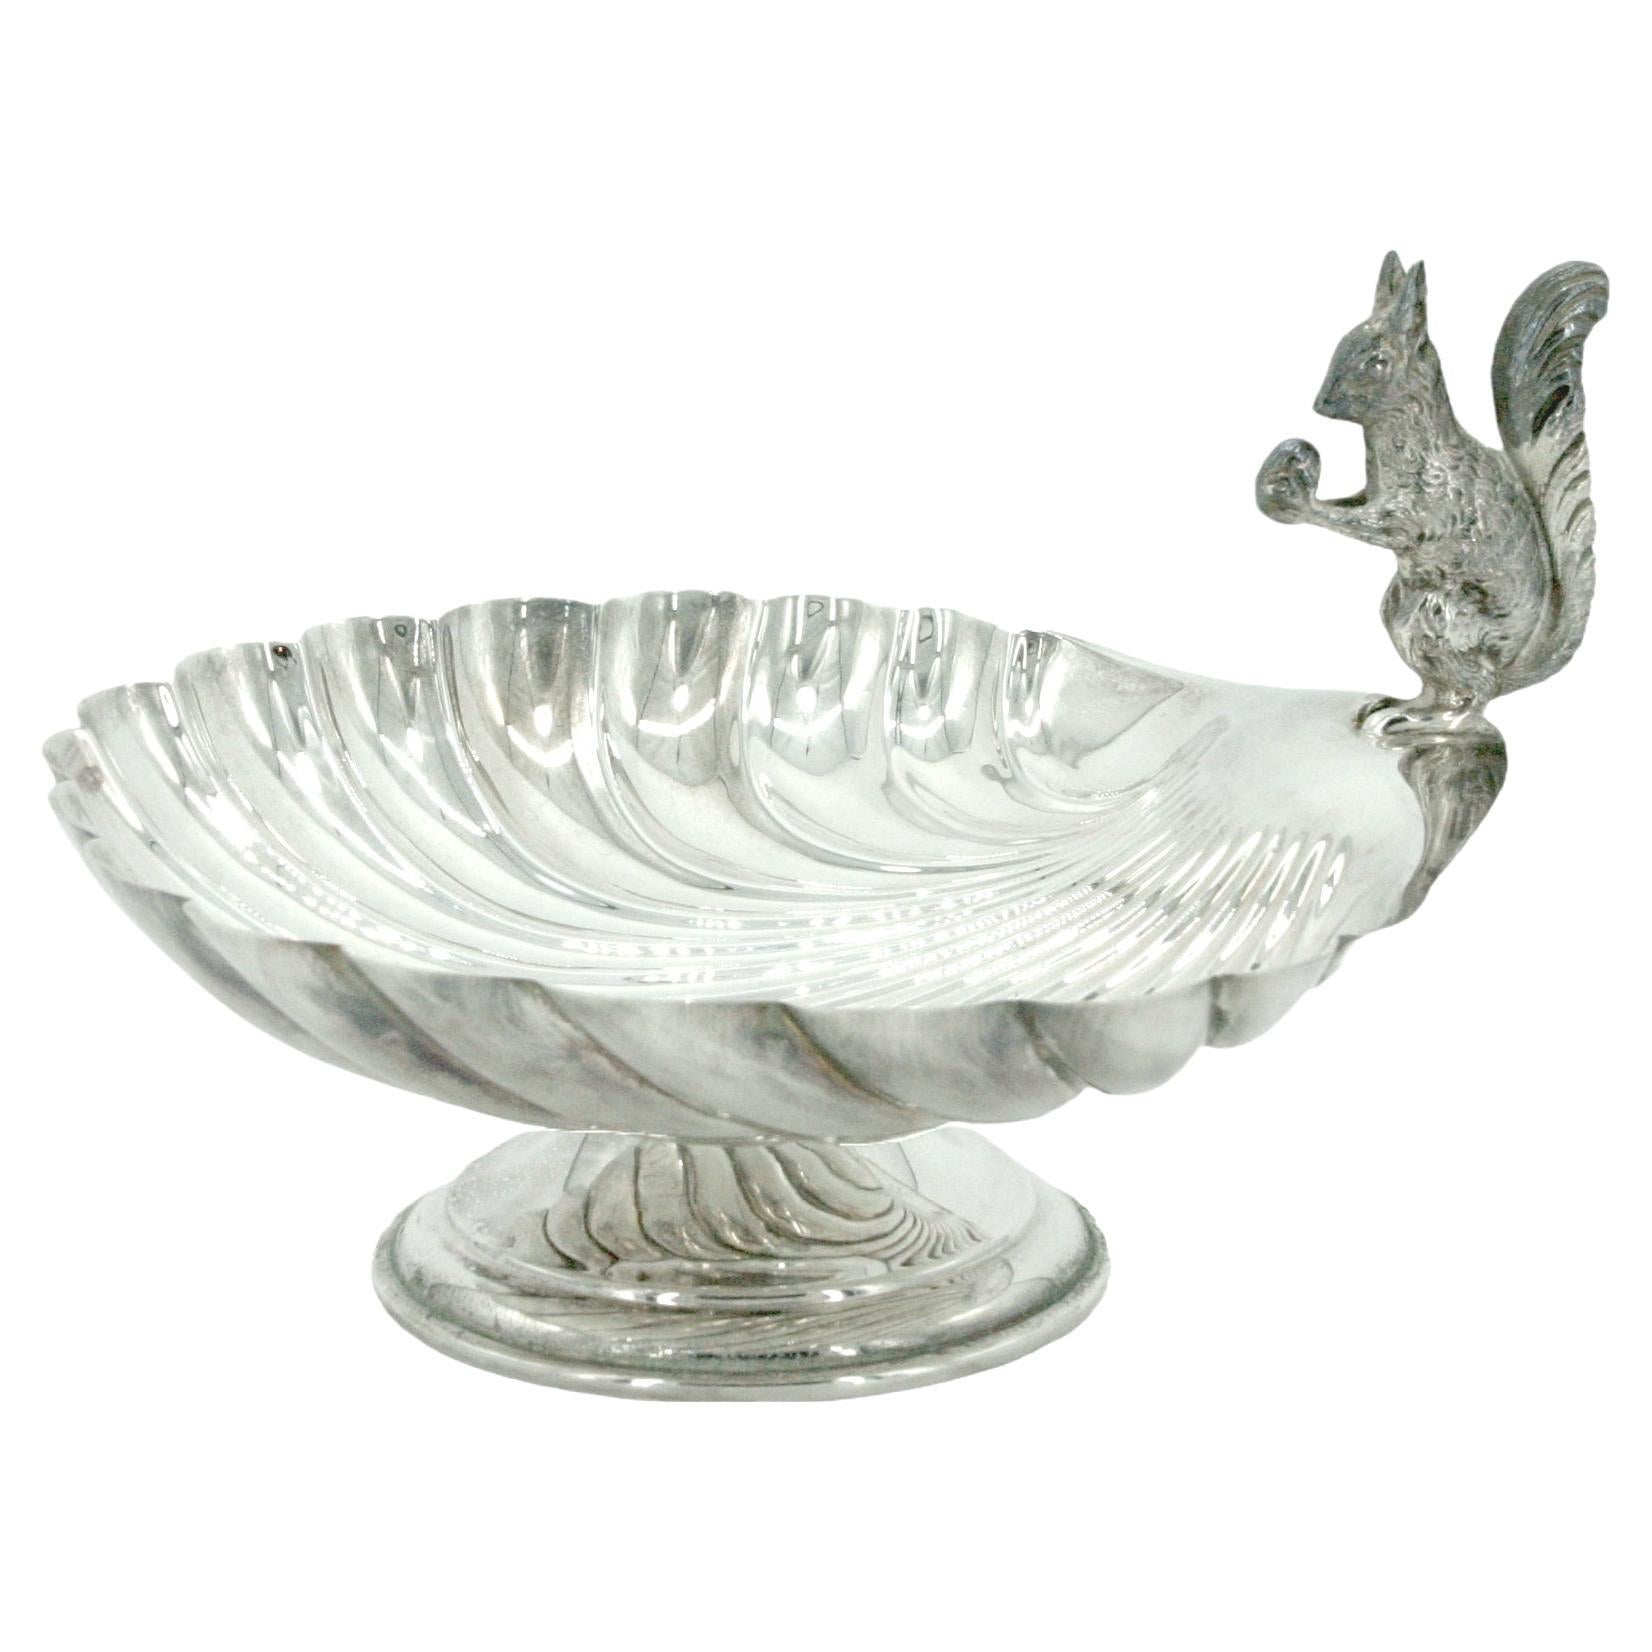 English Silver Plate Tableware Serving Piece